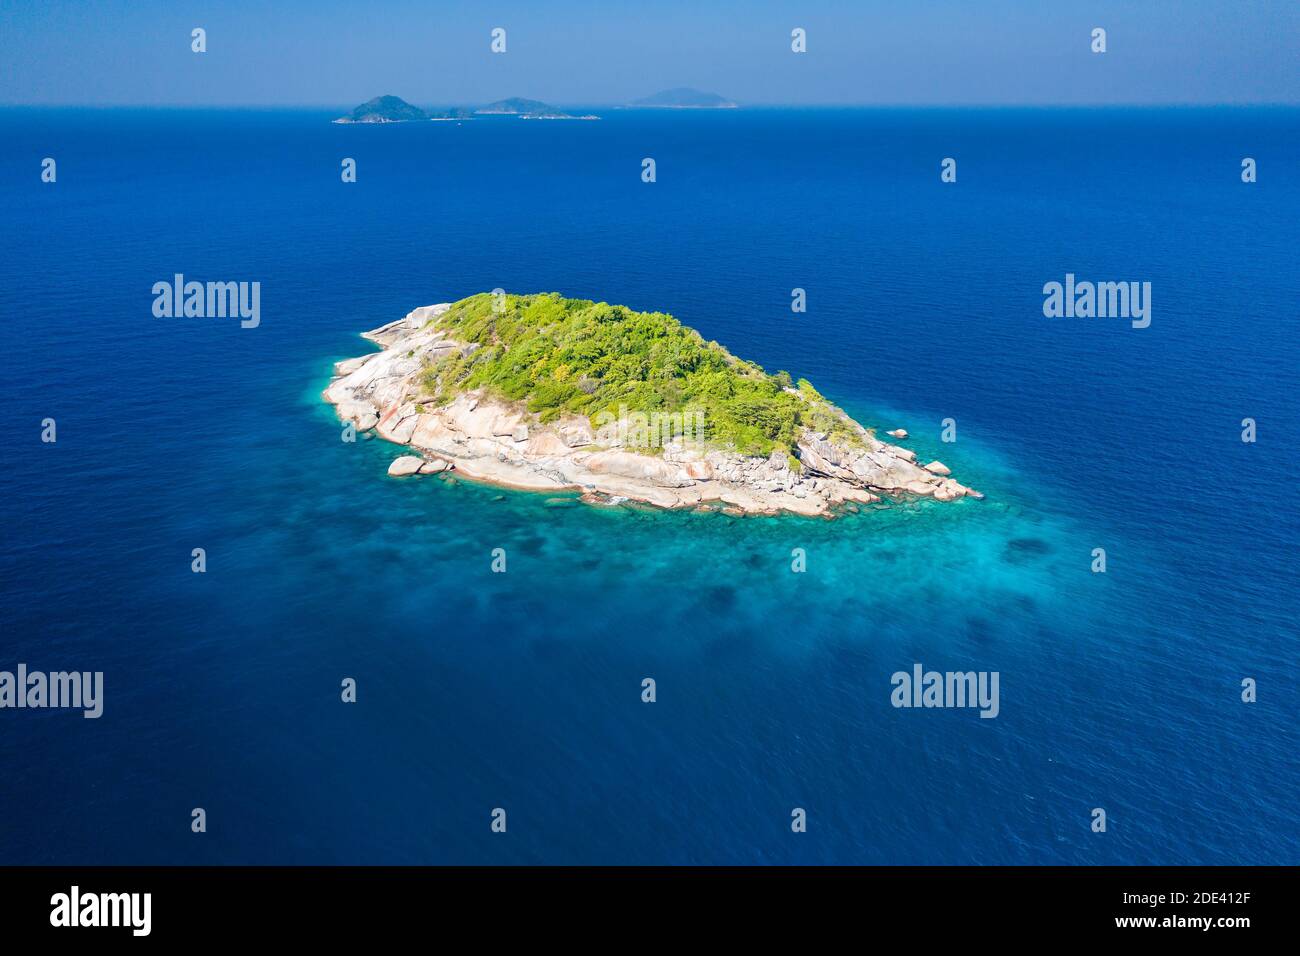 Aerial view of a remote, tiny tropical island in a clear, warm ocean (Andaman Sea) Stock Photo